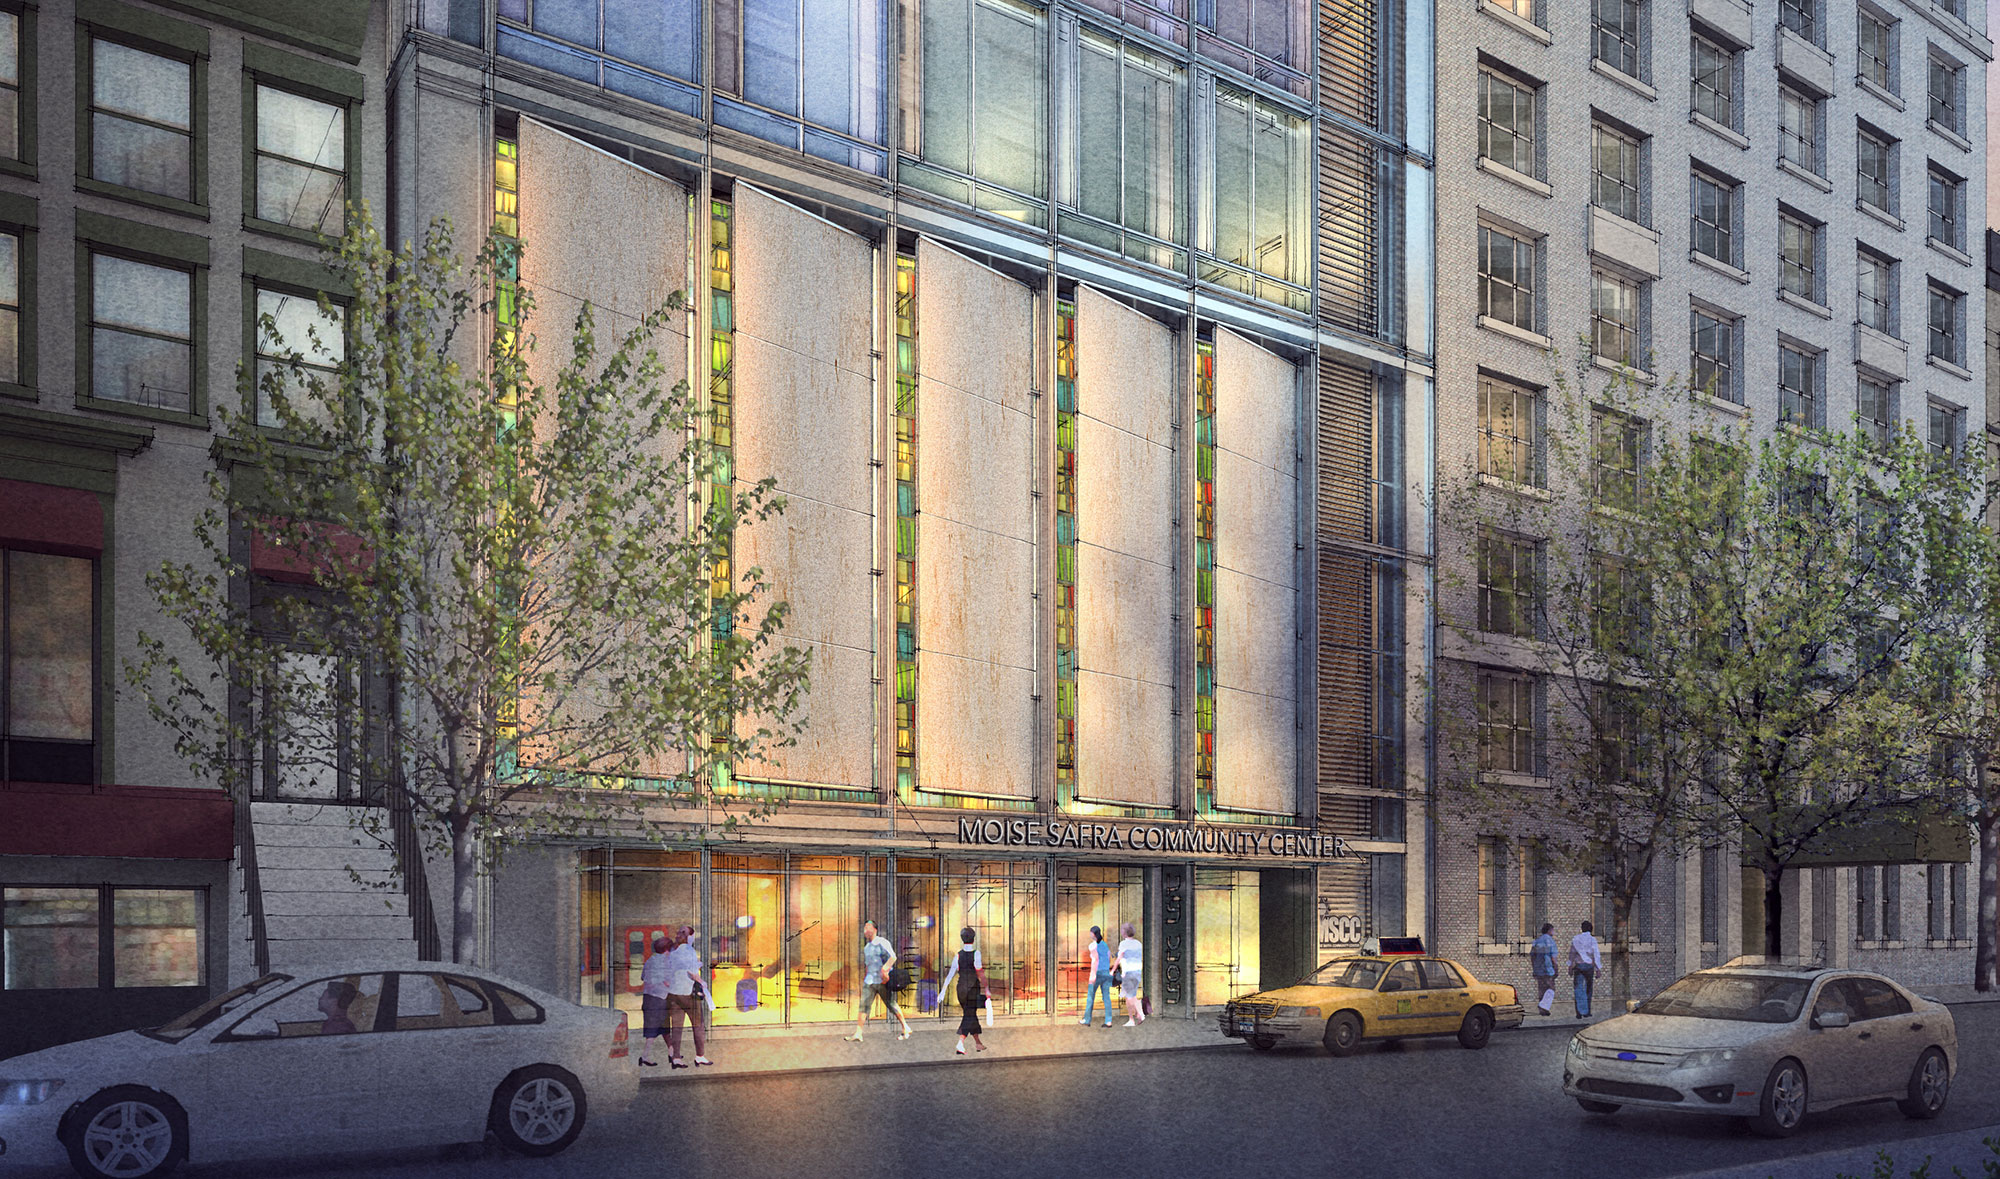 Rendering of Moise Safra Community Center, 130 East 82nd Street. By PBDW Architects via MSCC